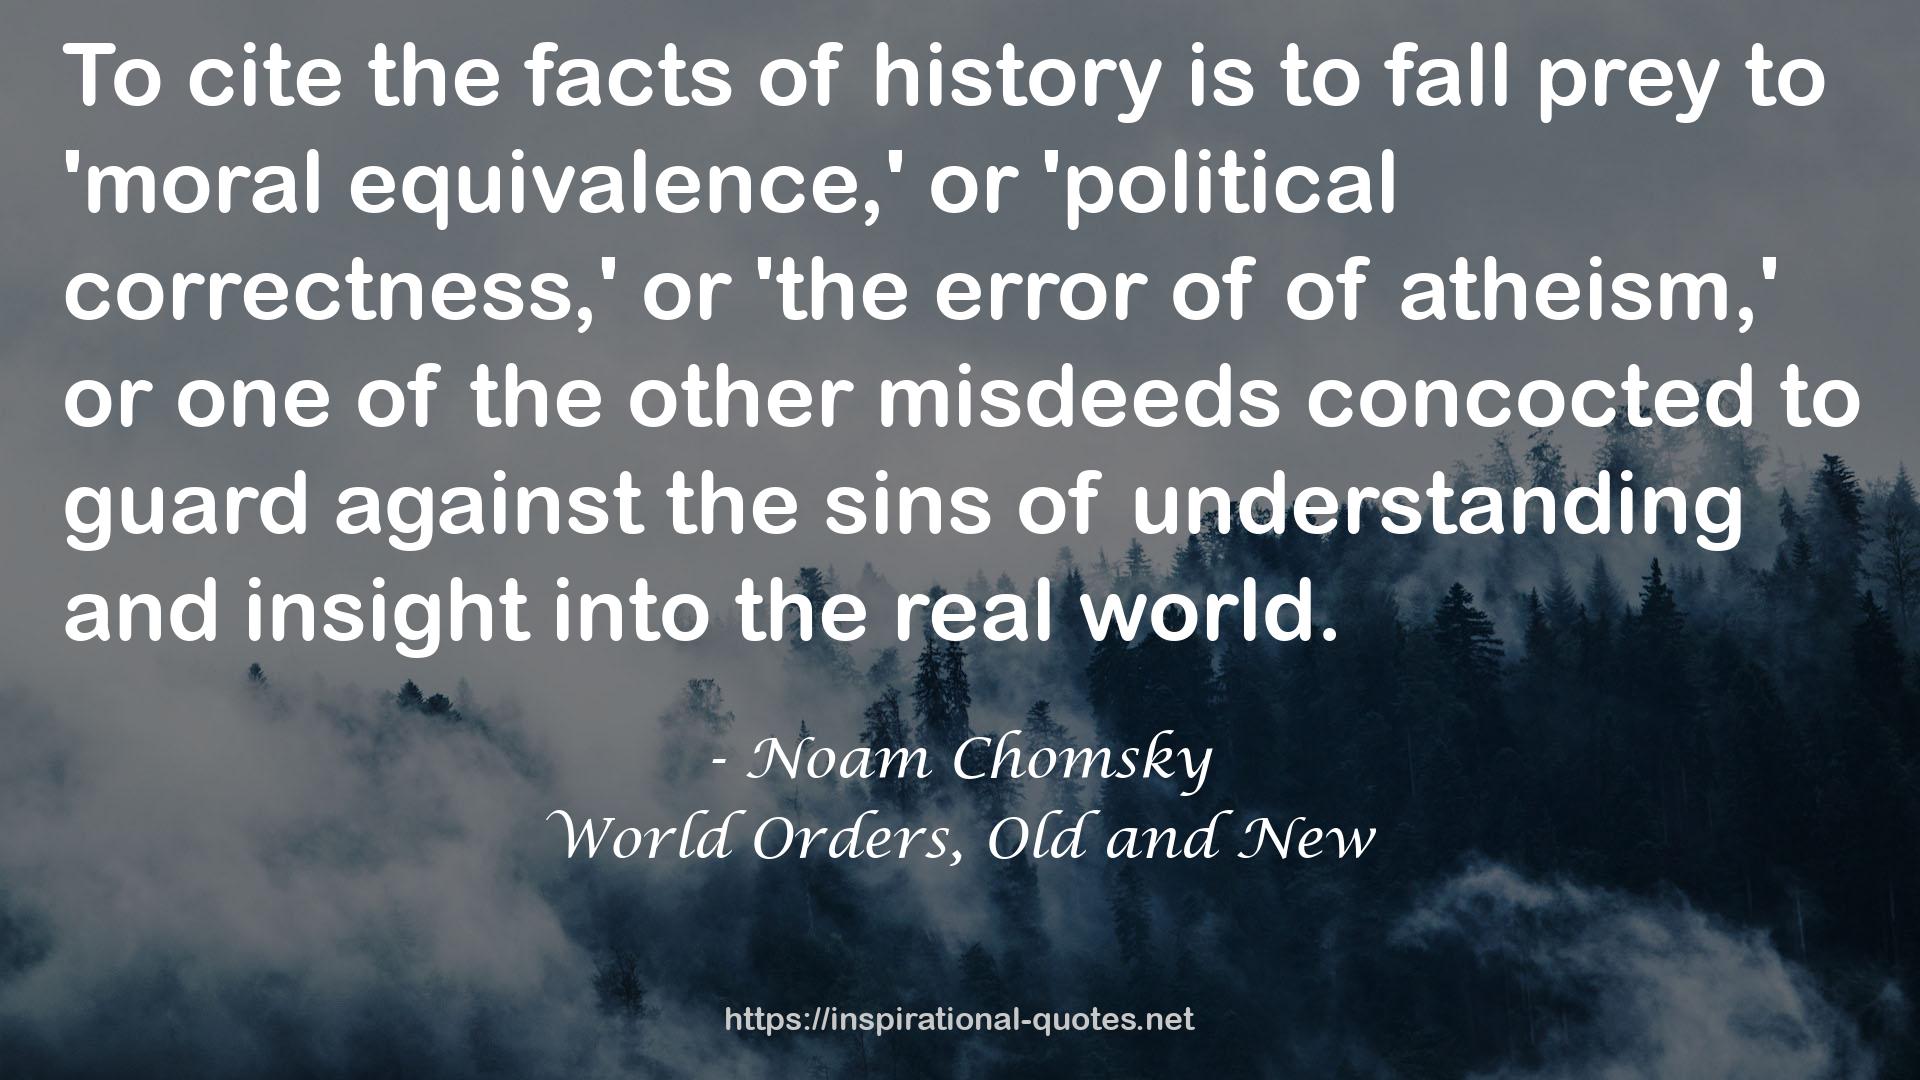 World Orders, Old and New QUOTES